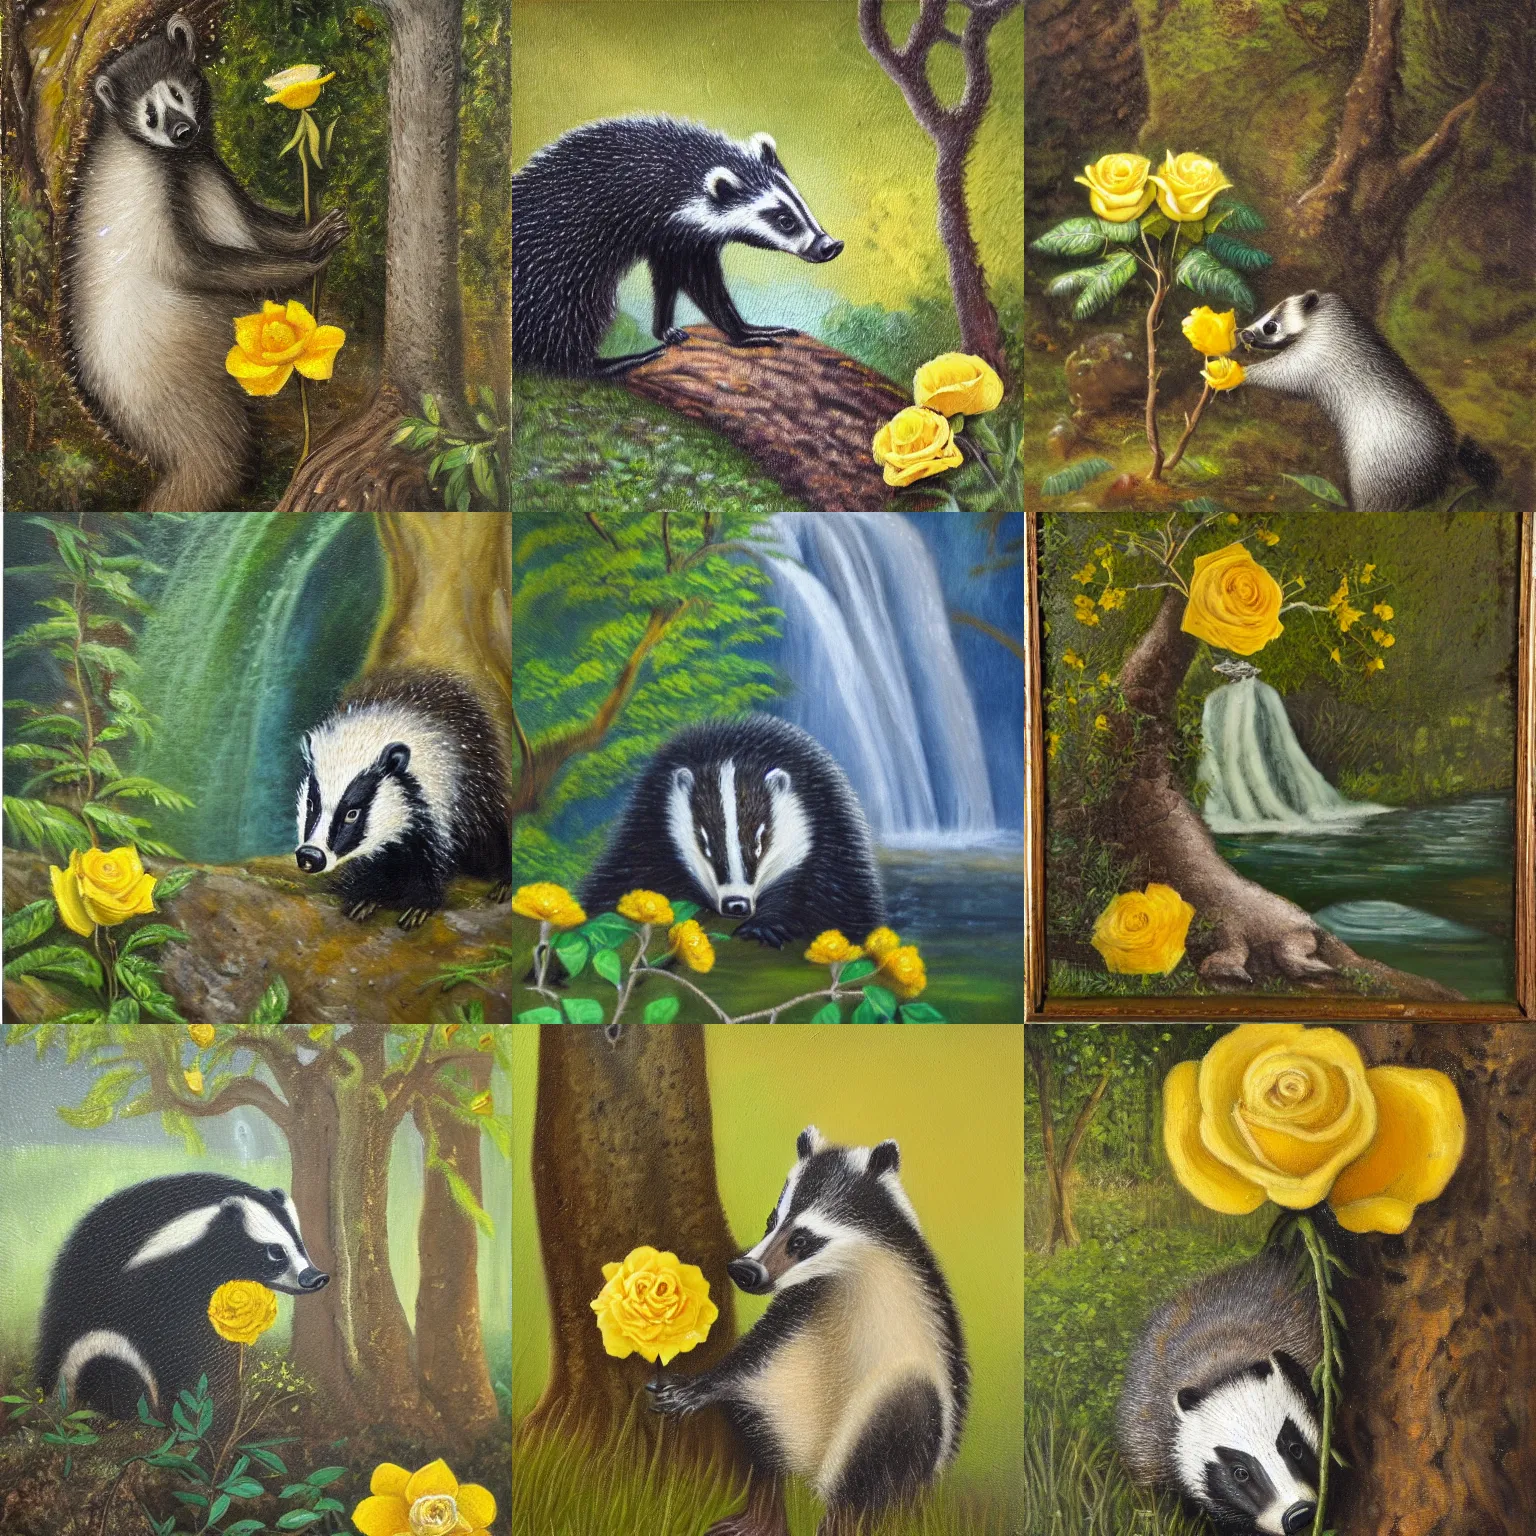 Prompt: a richly textured oil painting of a young badger delicately sniffing a yellow rose next to a tree trunk. a small waterfall can be seen in the background.